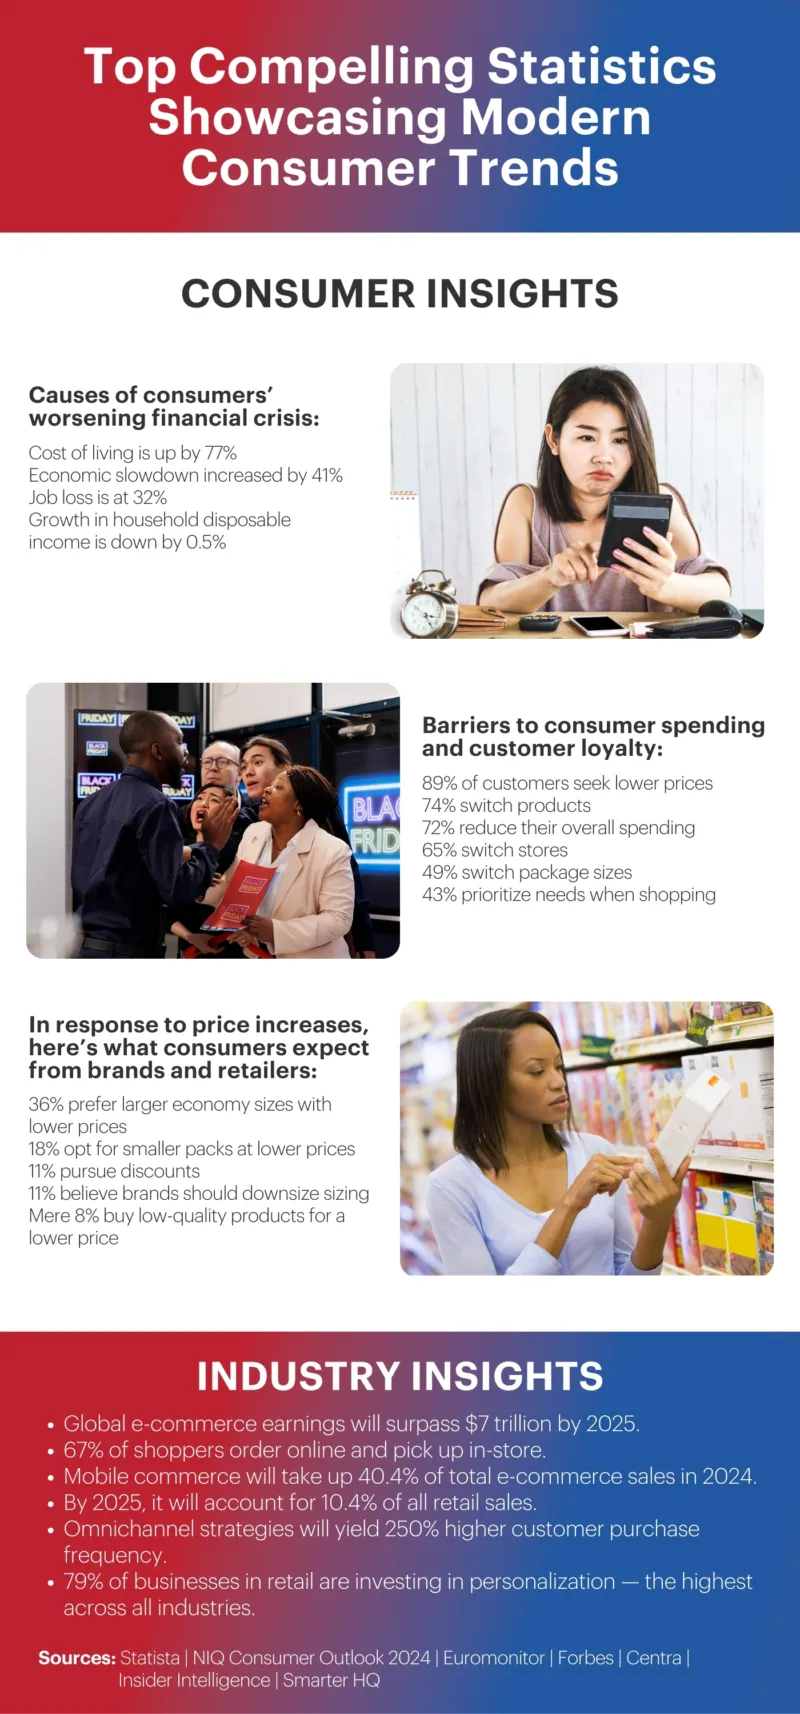 An infographic show statistics showing modern consumer trends changing customer behavior.